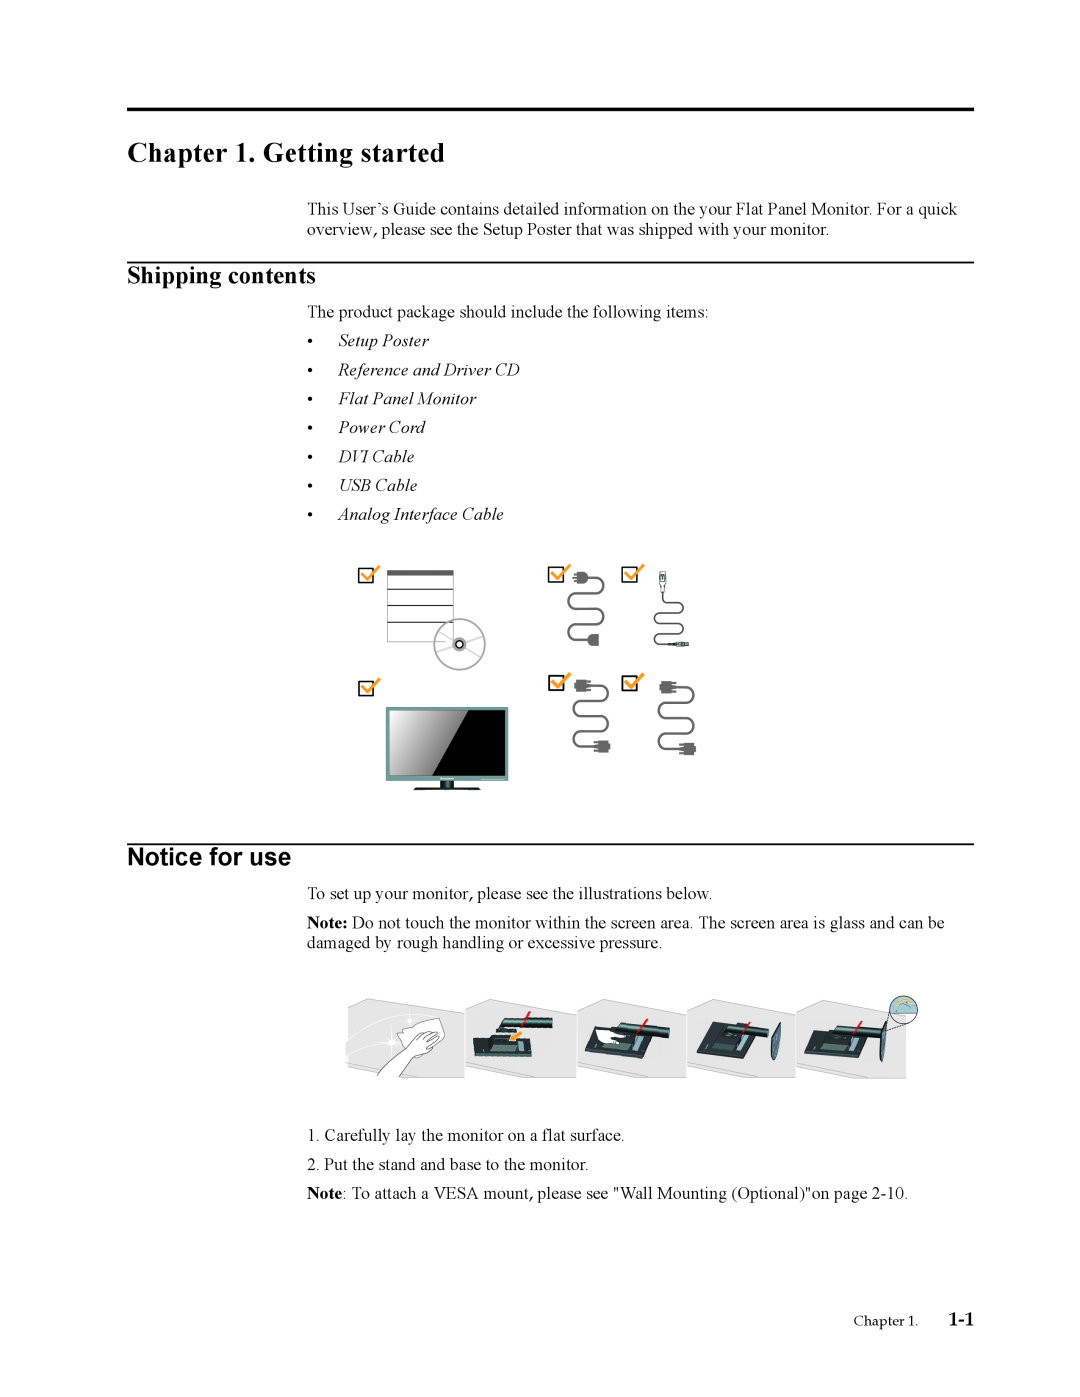 Lenovo 3024HC1 manual Getting started, Shipping contents, Notice for use, Setup Poster Reference and Driver CD 